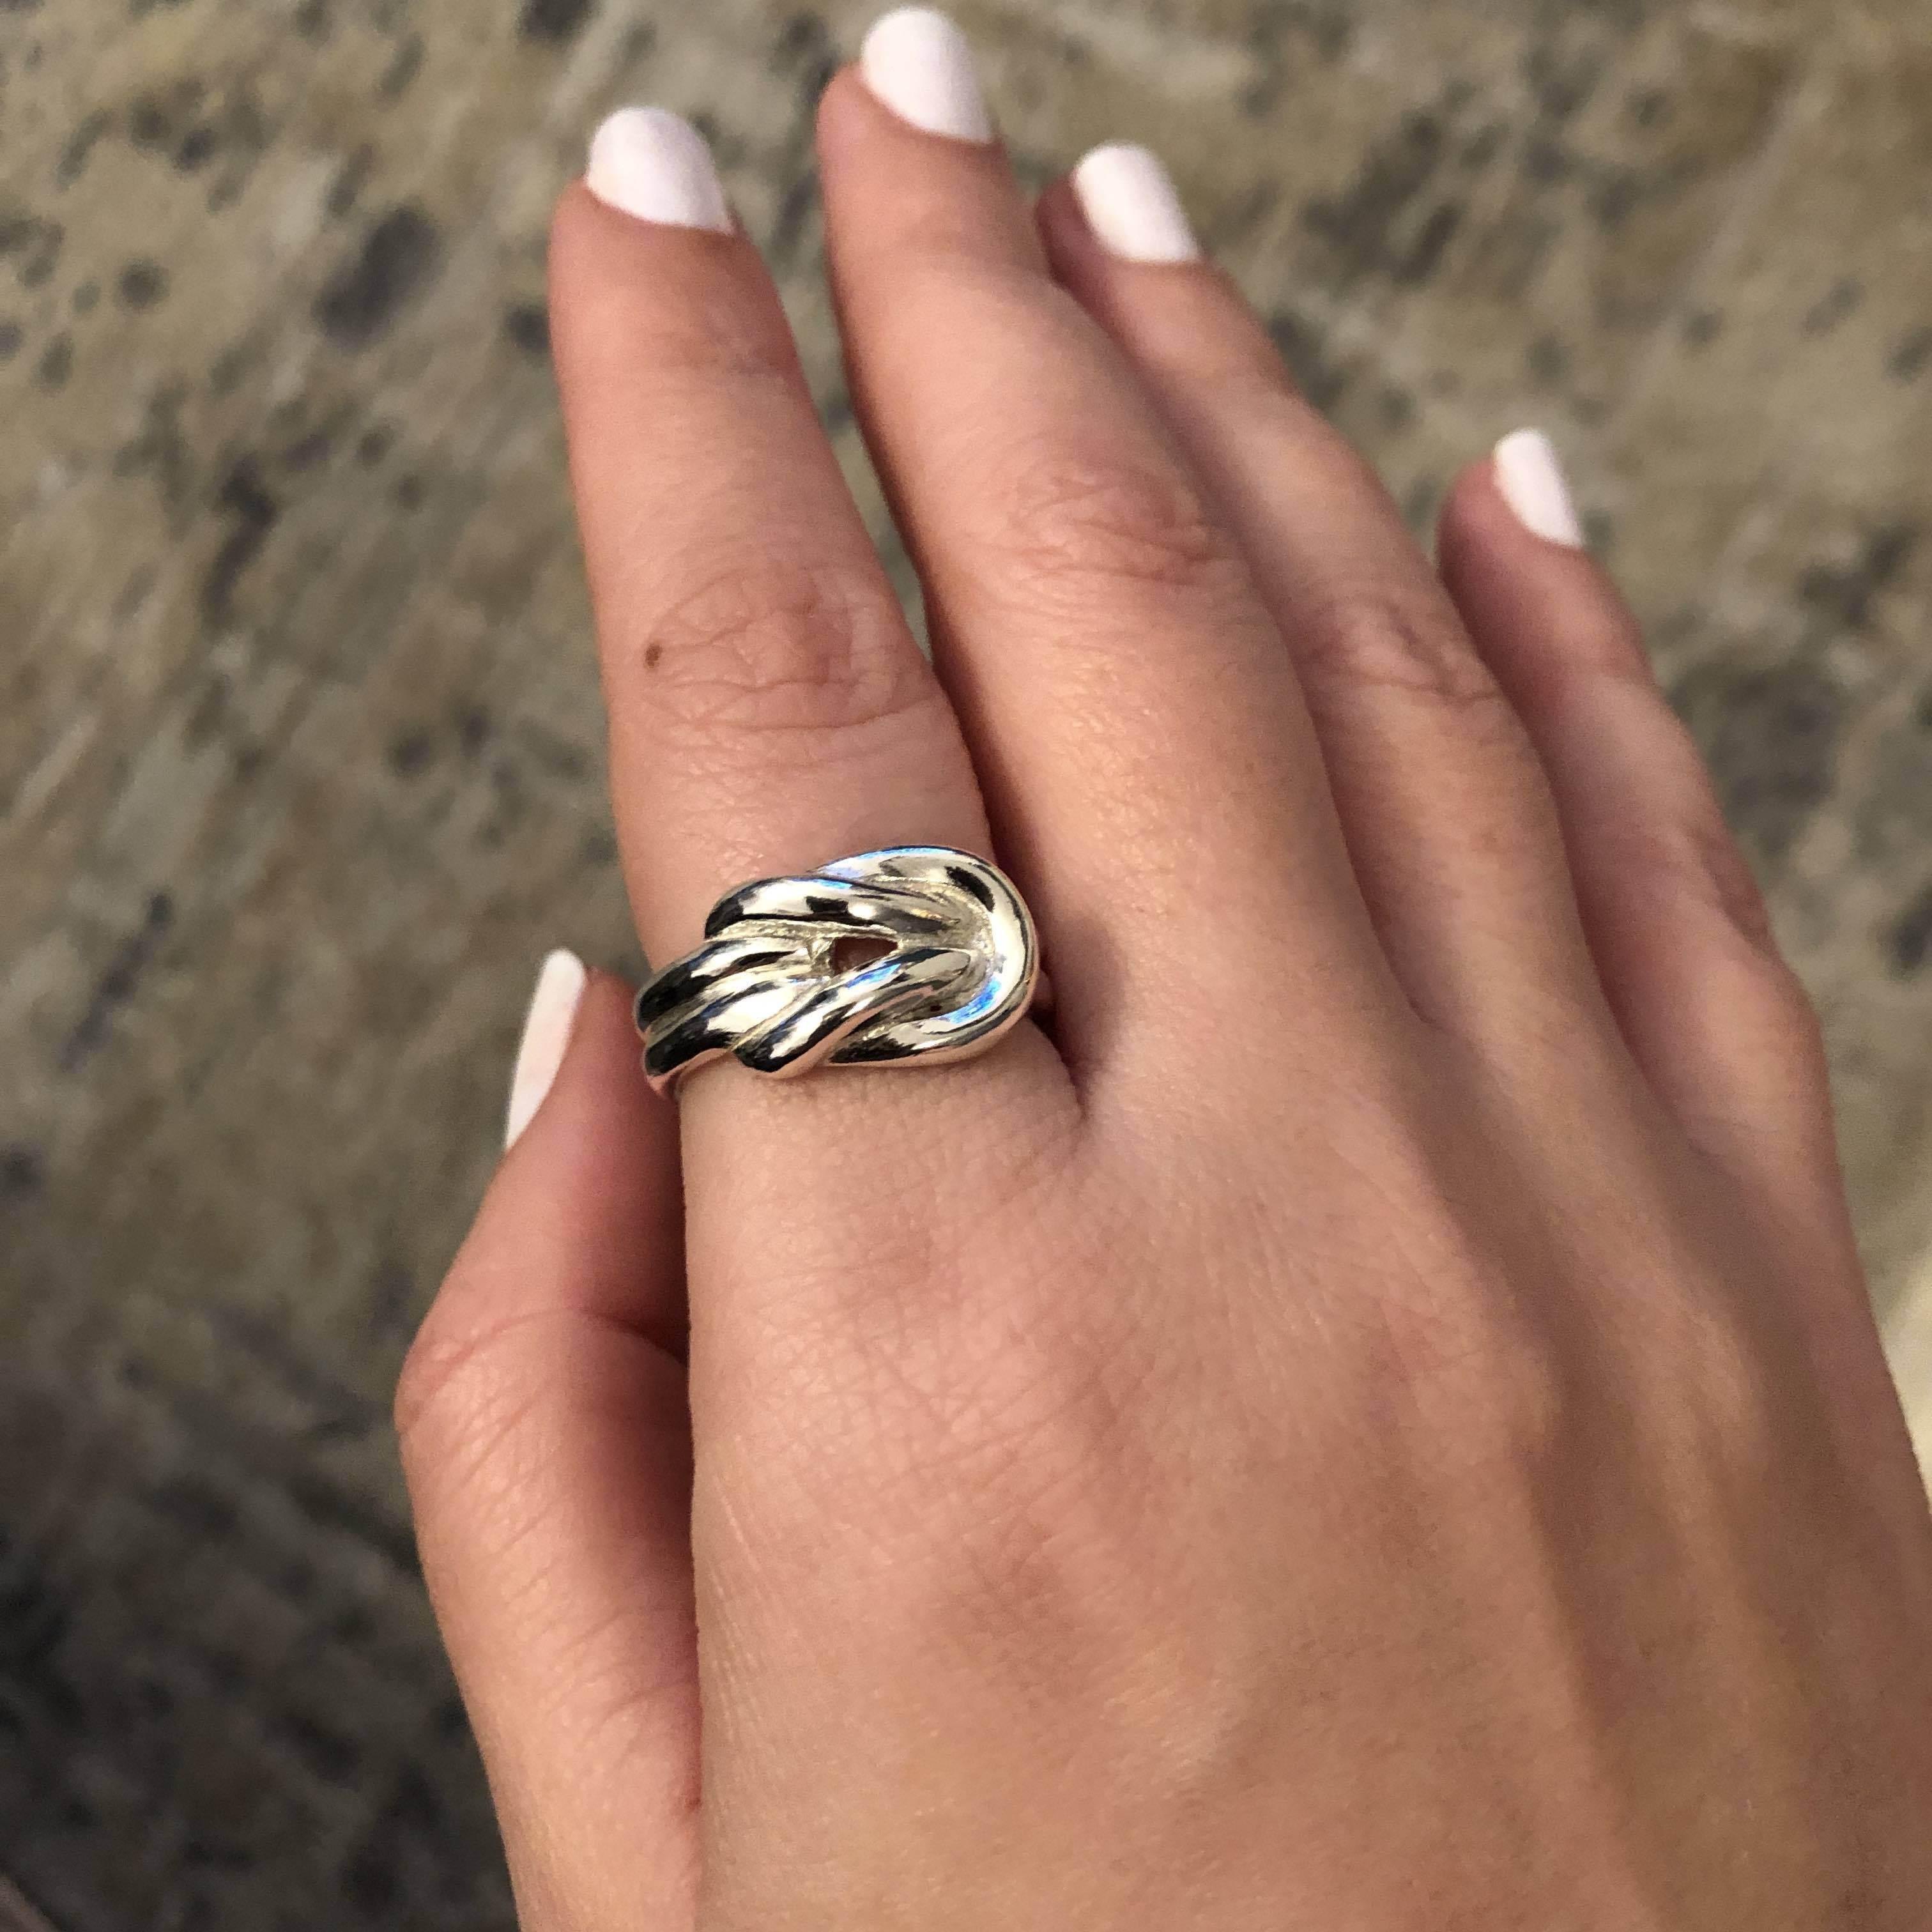 Love Knot Ring in Sterling Silver (DT-130)